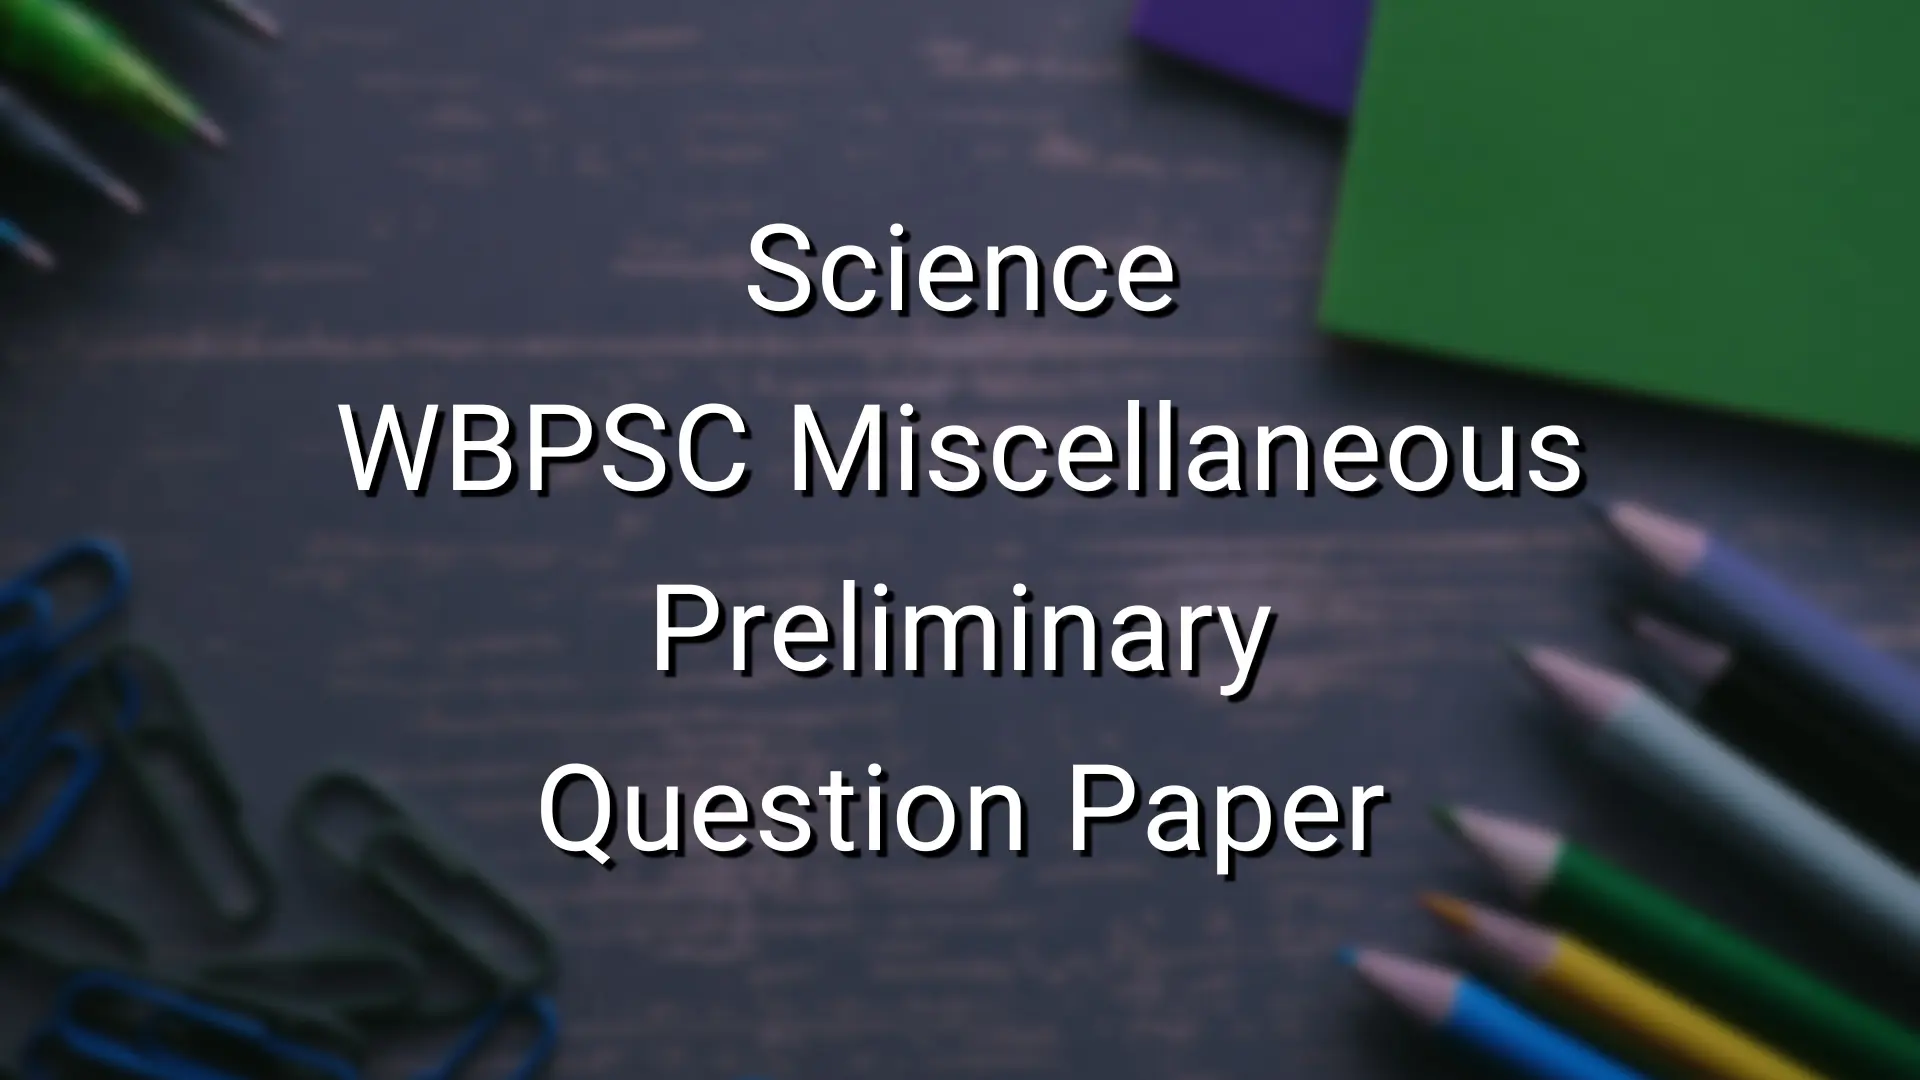 Science - WBPSC Miscellaneous Preliminary Question Paper